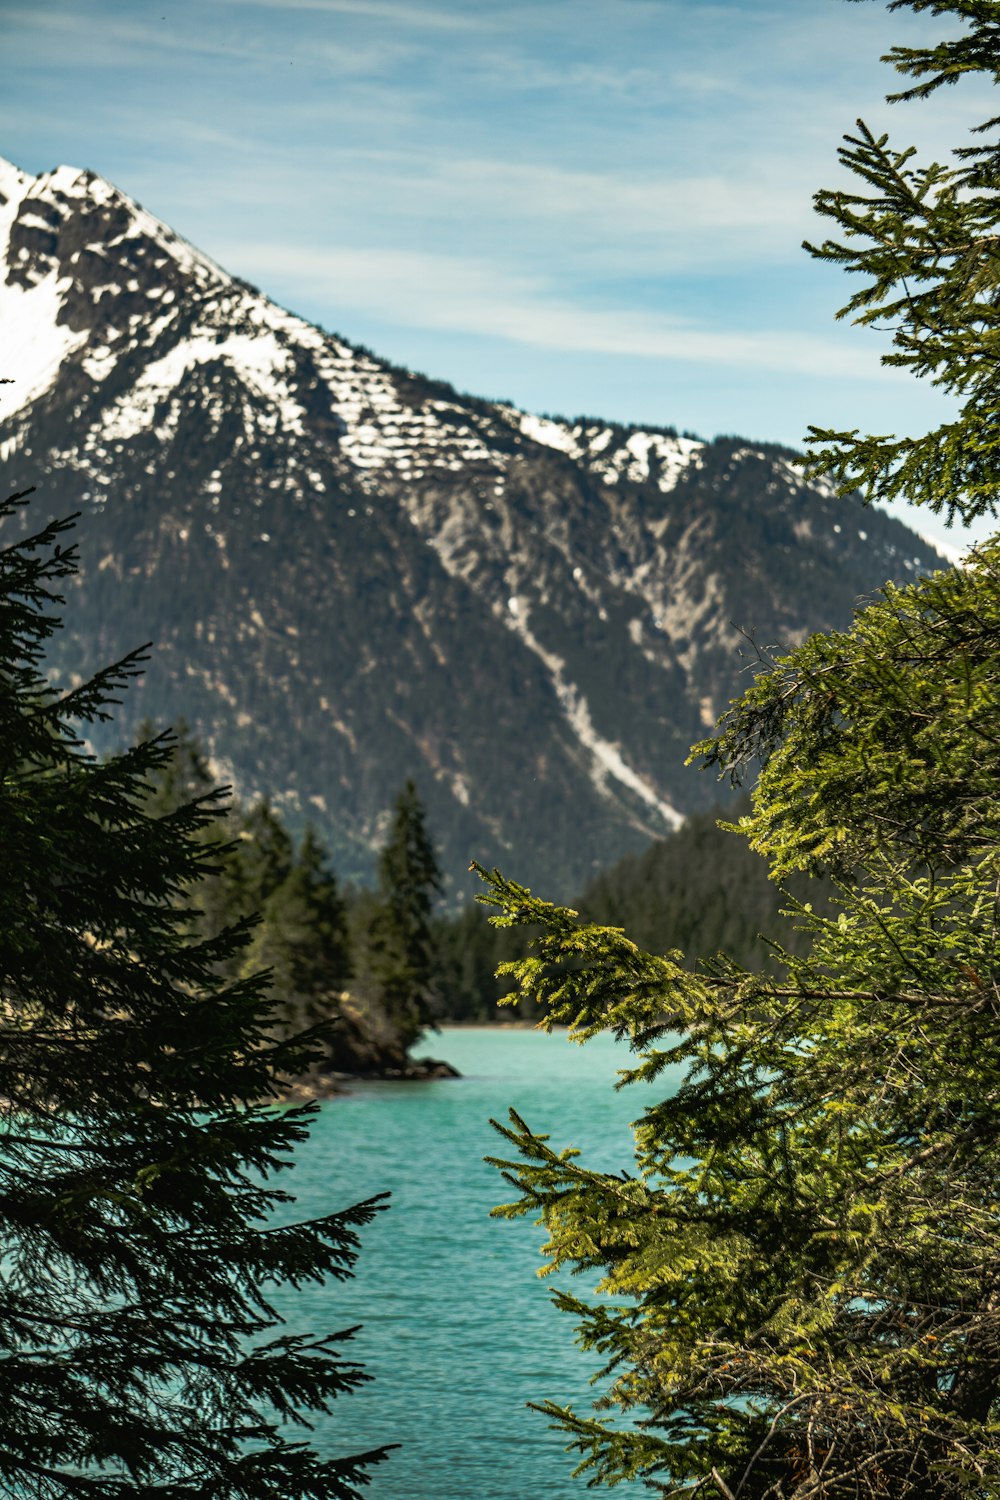 a view of a mountain and a lake through some trees